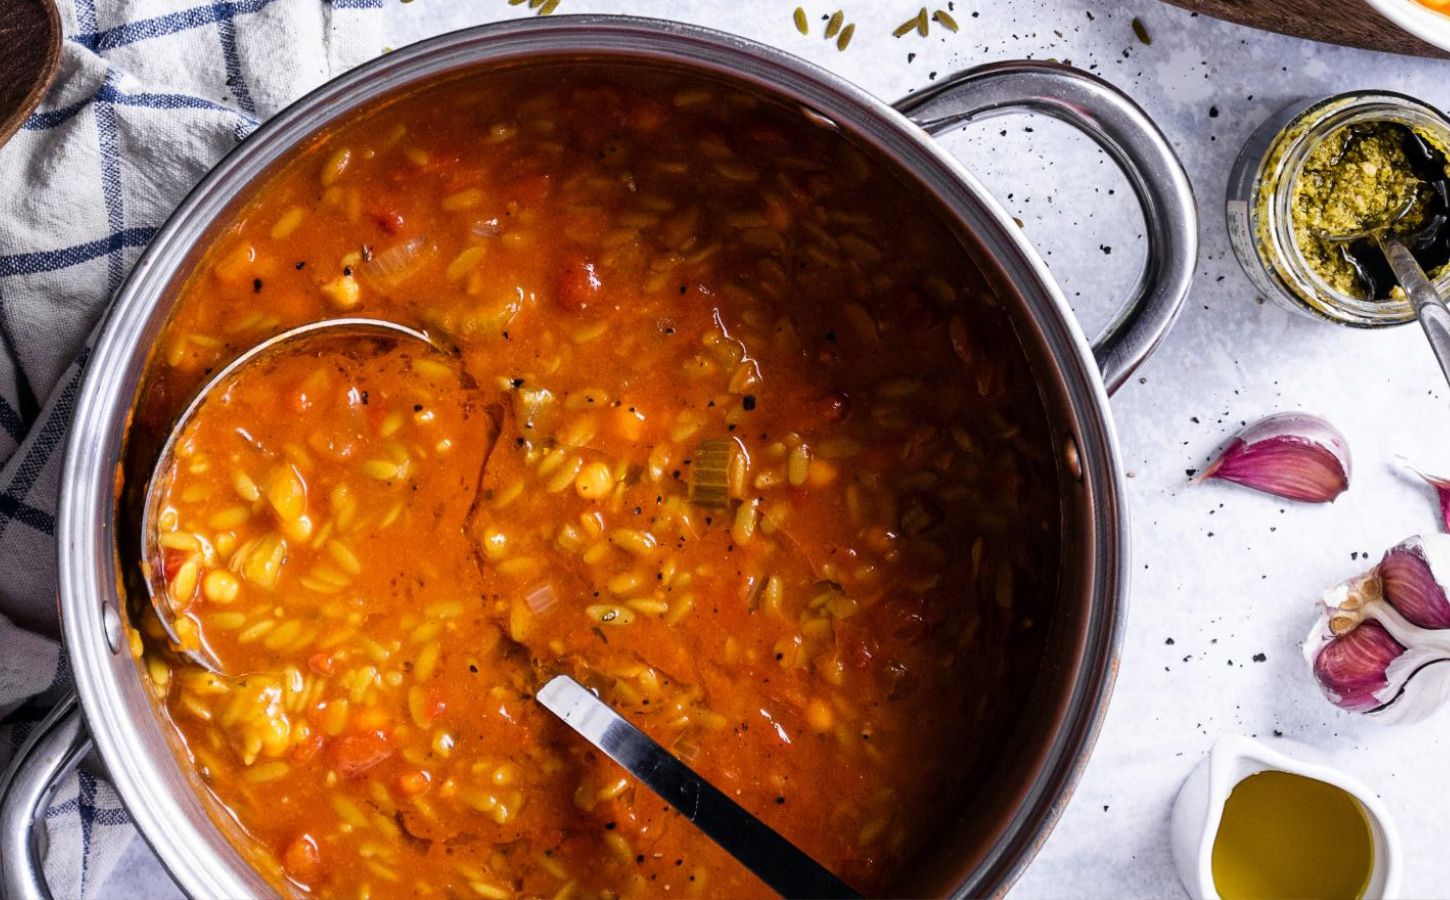 A vegan soup made with orzo pasta